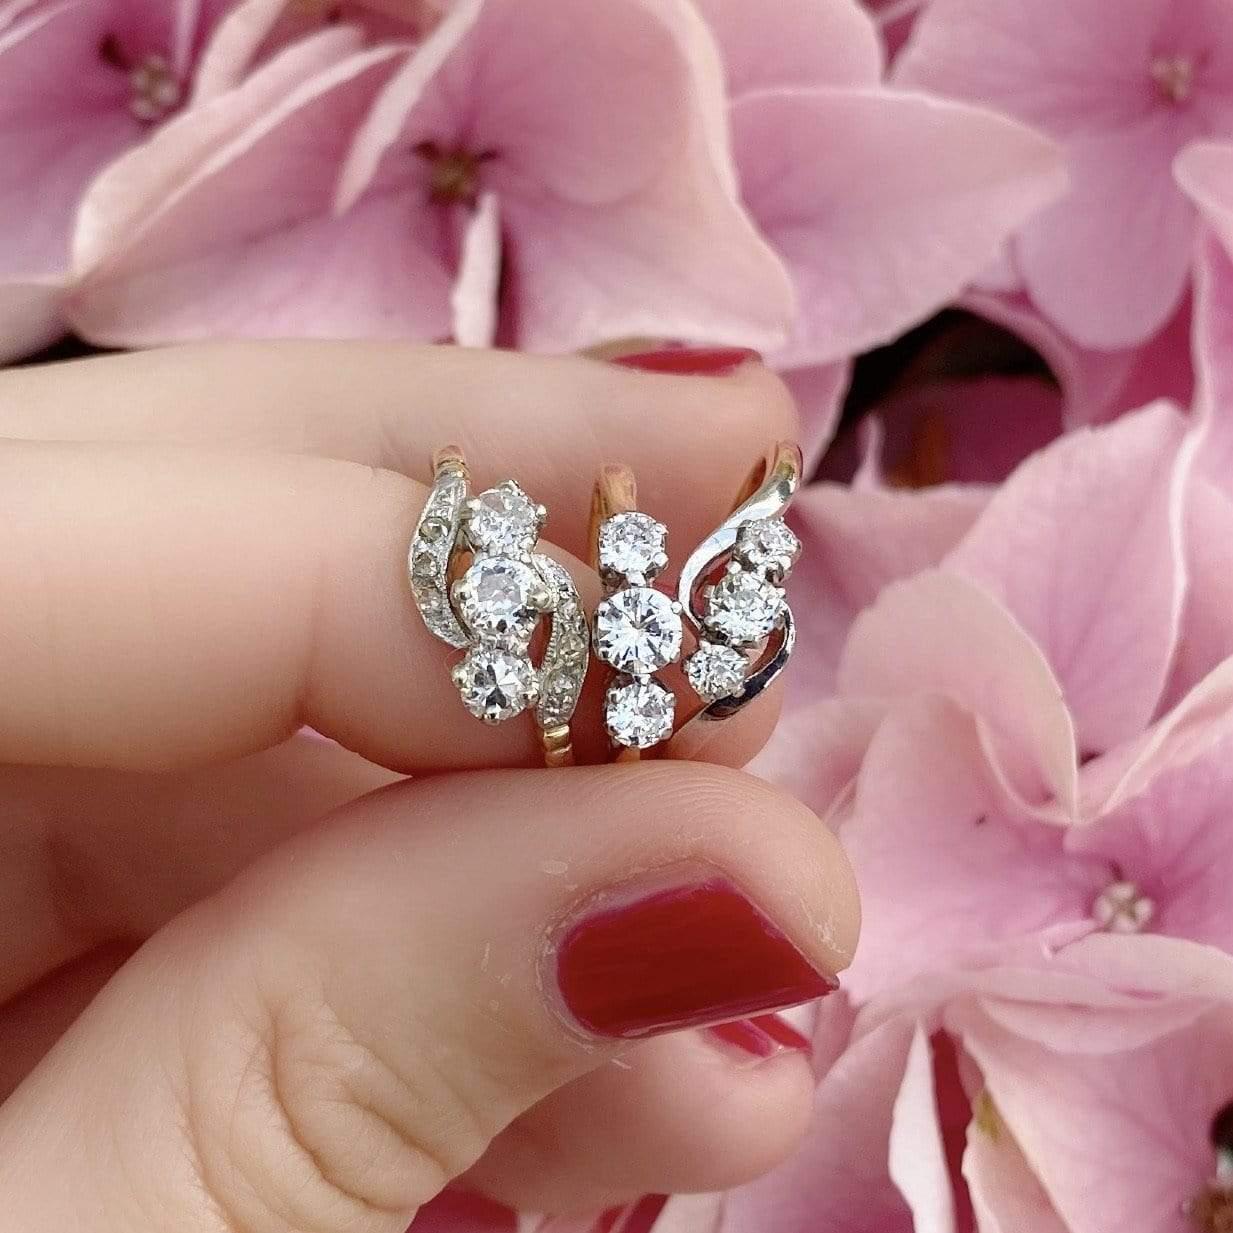 Diamonds symbolise innocence and love, they are the birthstone of April. Our triple diamond ring features a stunning 0.42ct of bright white diamonds set in 18ct yellow gold. The ring has a larger central diamond with two smaller diamonds either